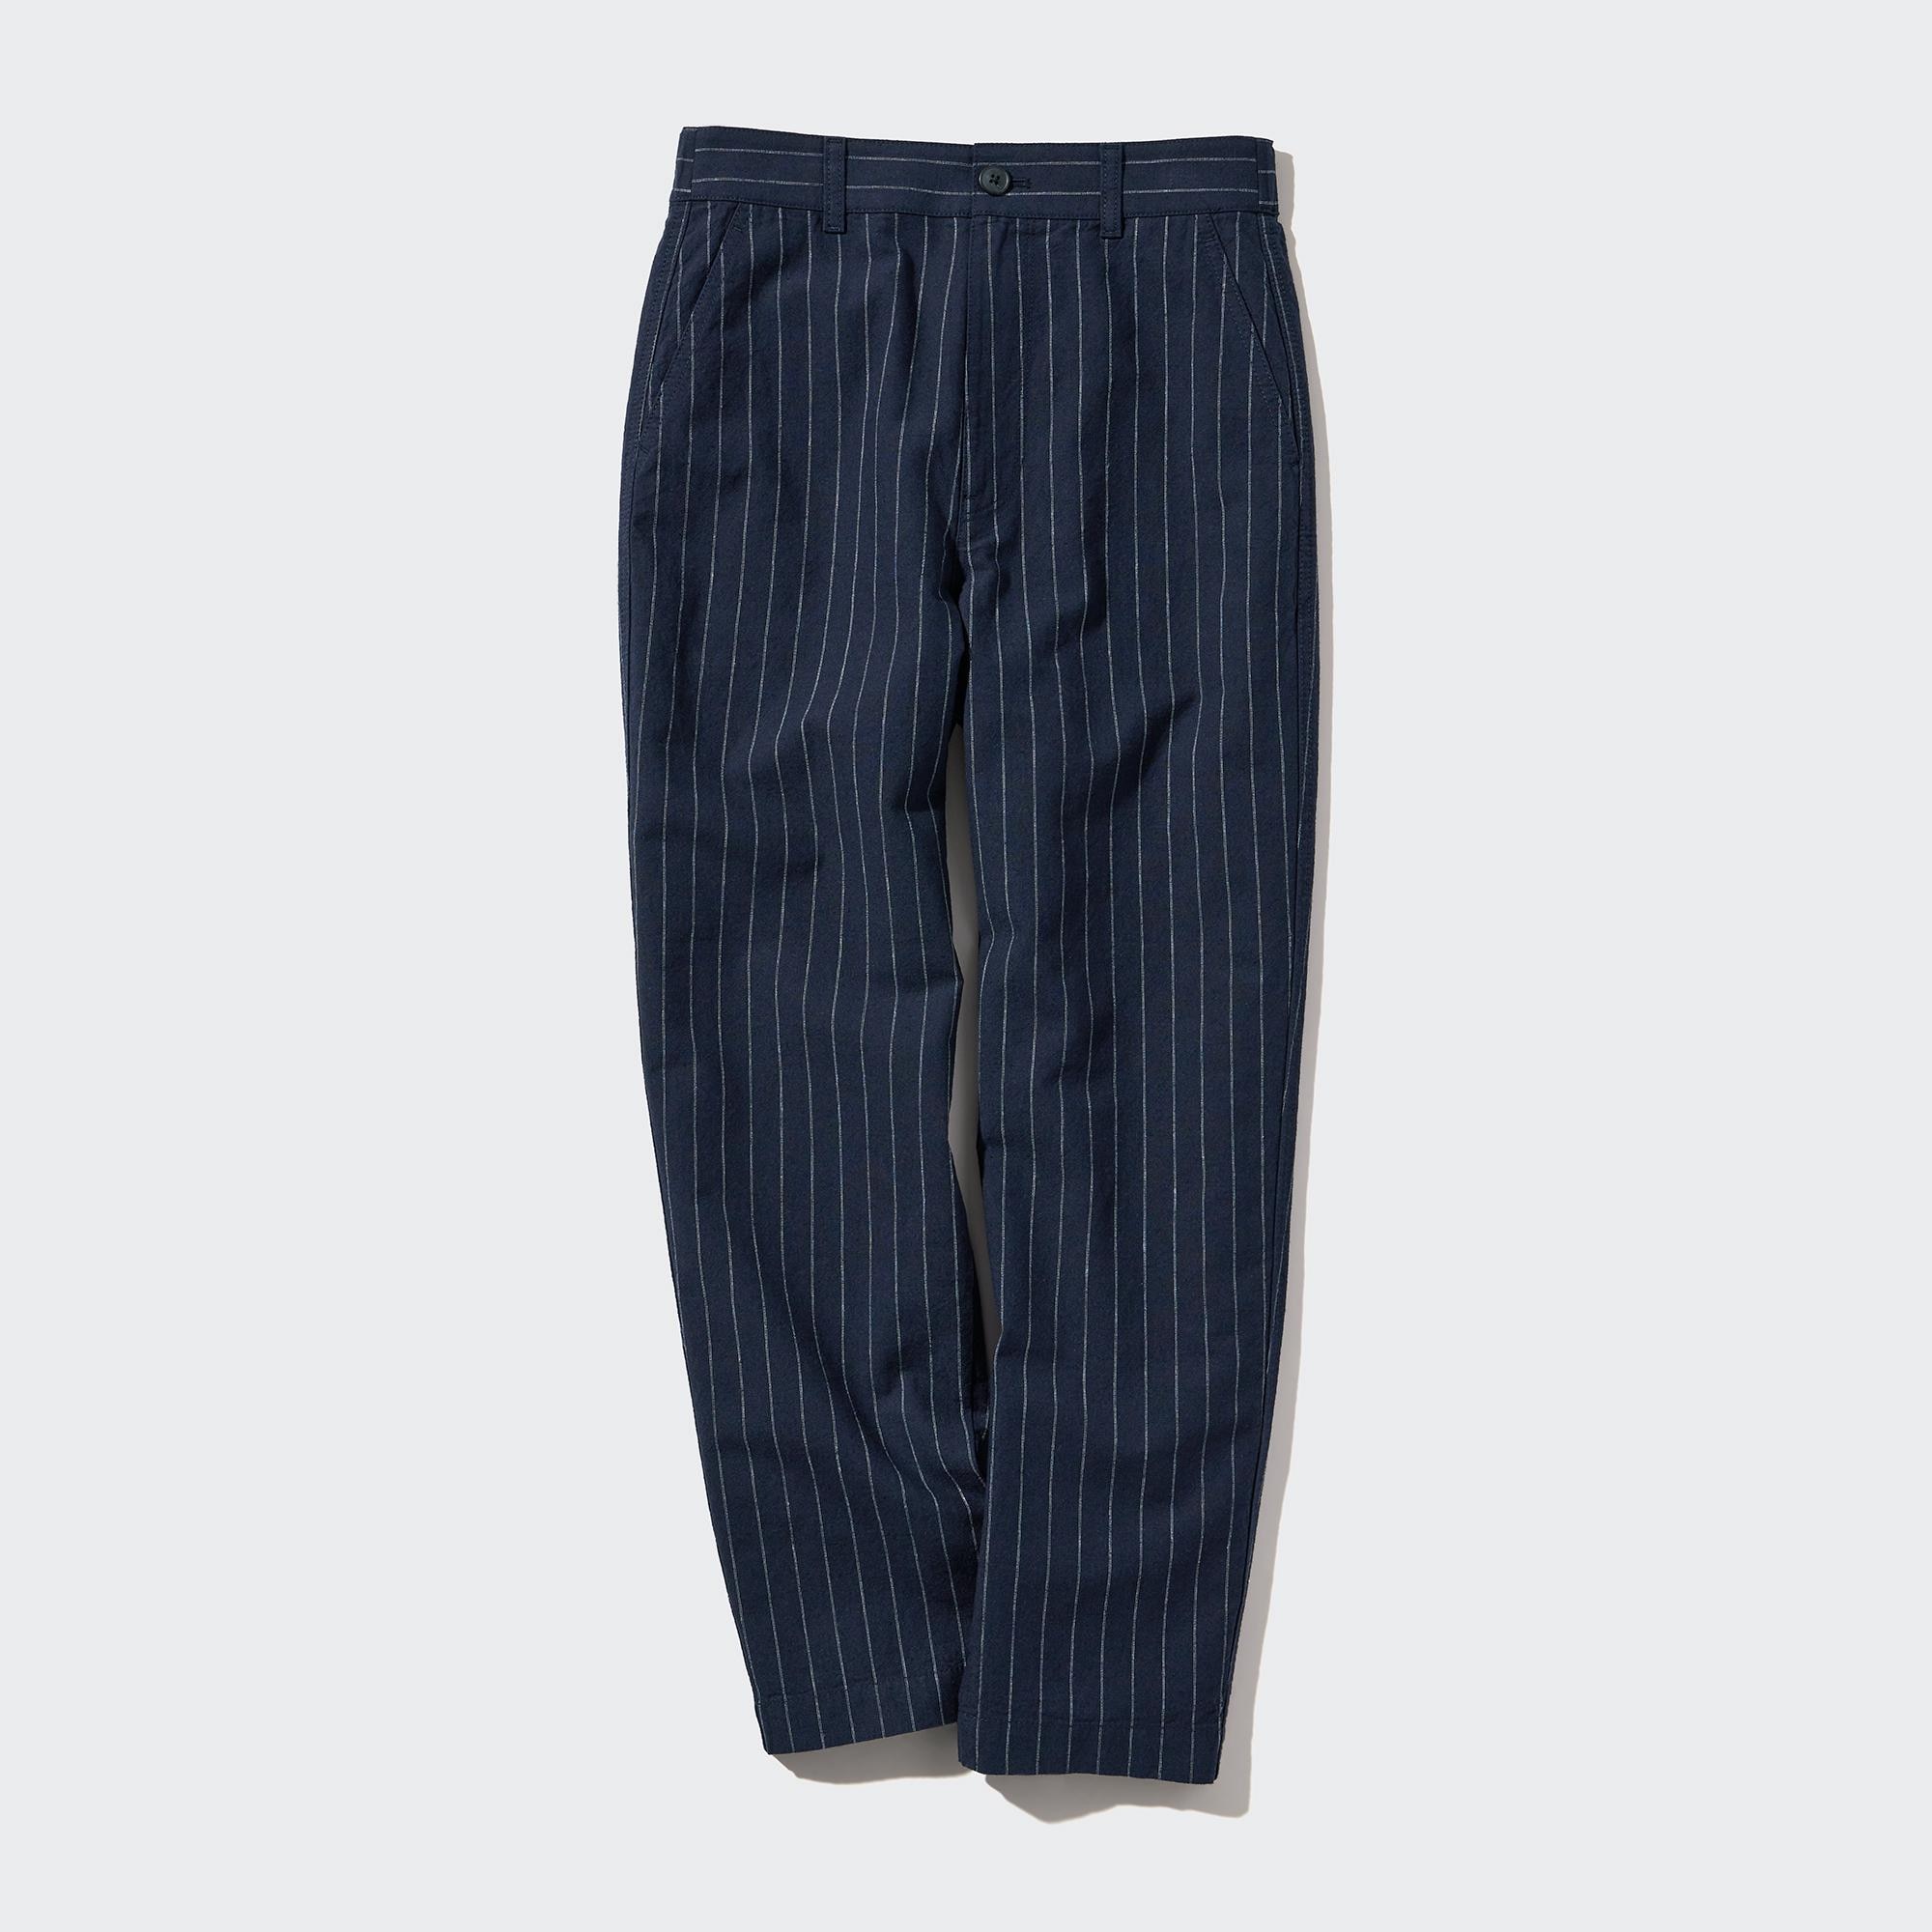 Linen Cotton Striped Tapered Pants